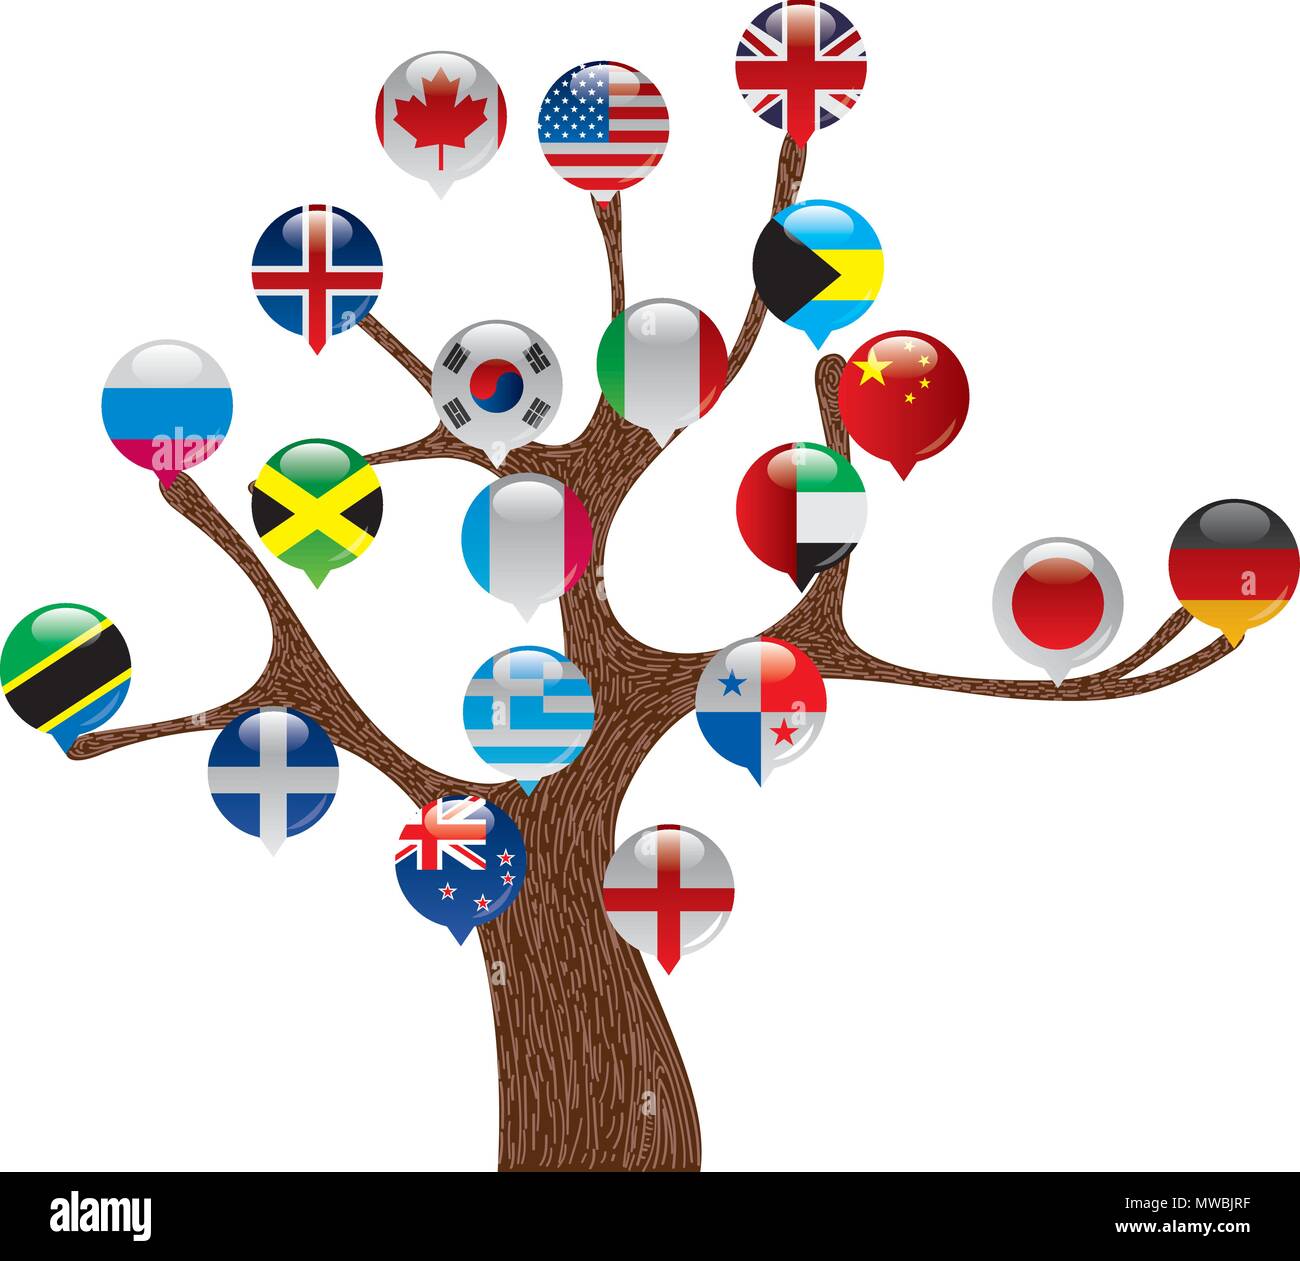 National flag design, speech bubble set, hanging on a branch. Stock Vector